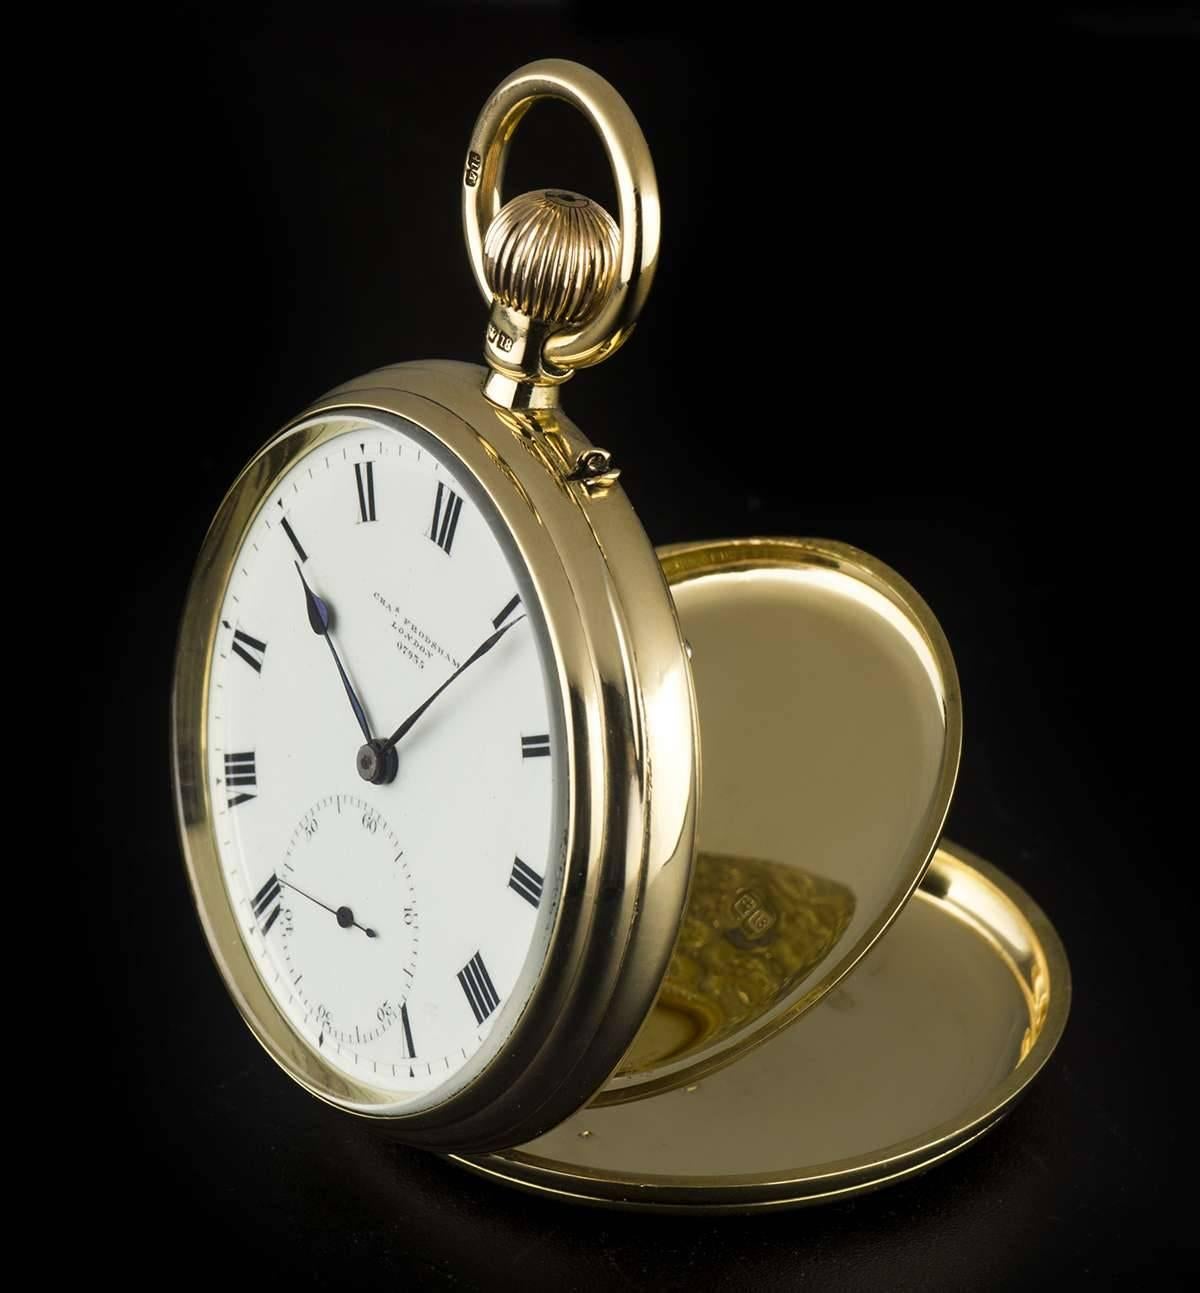 A Gold Open Face Pocket Watch, cream enamel dial with roman numerals, small seconds at 6 0'clock, a fixed gold bezel and case, plastic glass, 3/4 plate lever movement with engraved raised barrels and original fully blued screws, in excellent